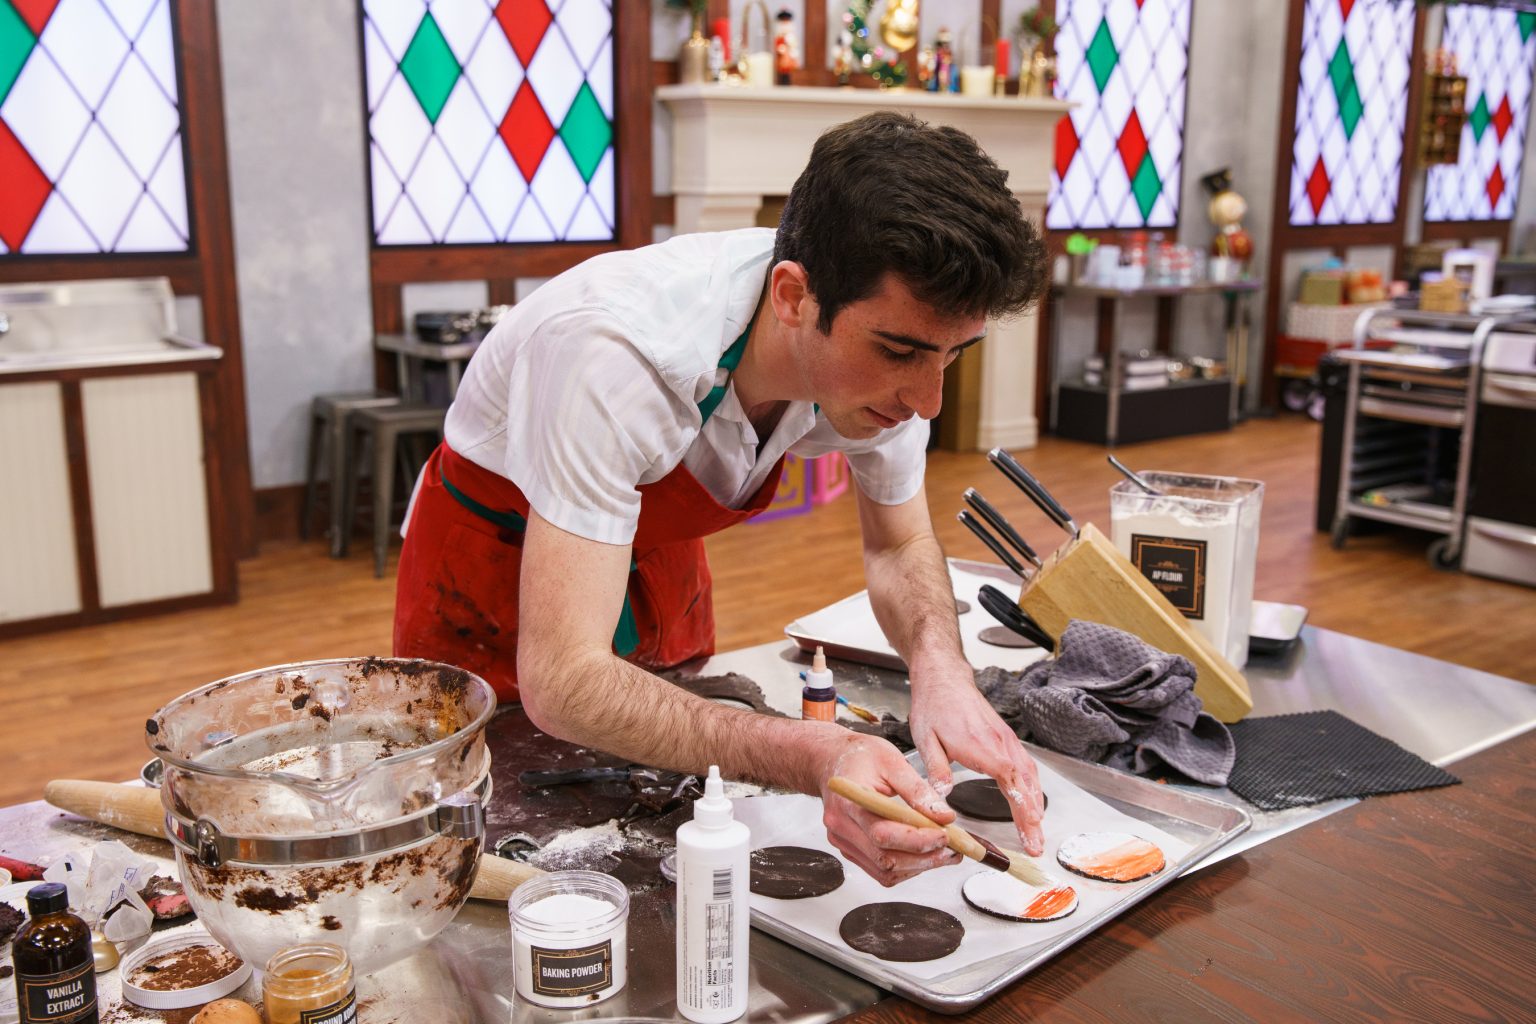 West Hartford Native Competes on Food Network's 'Christmas Cookie